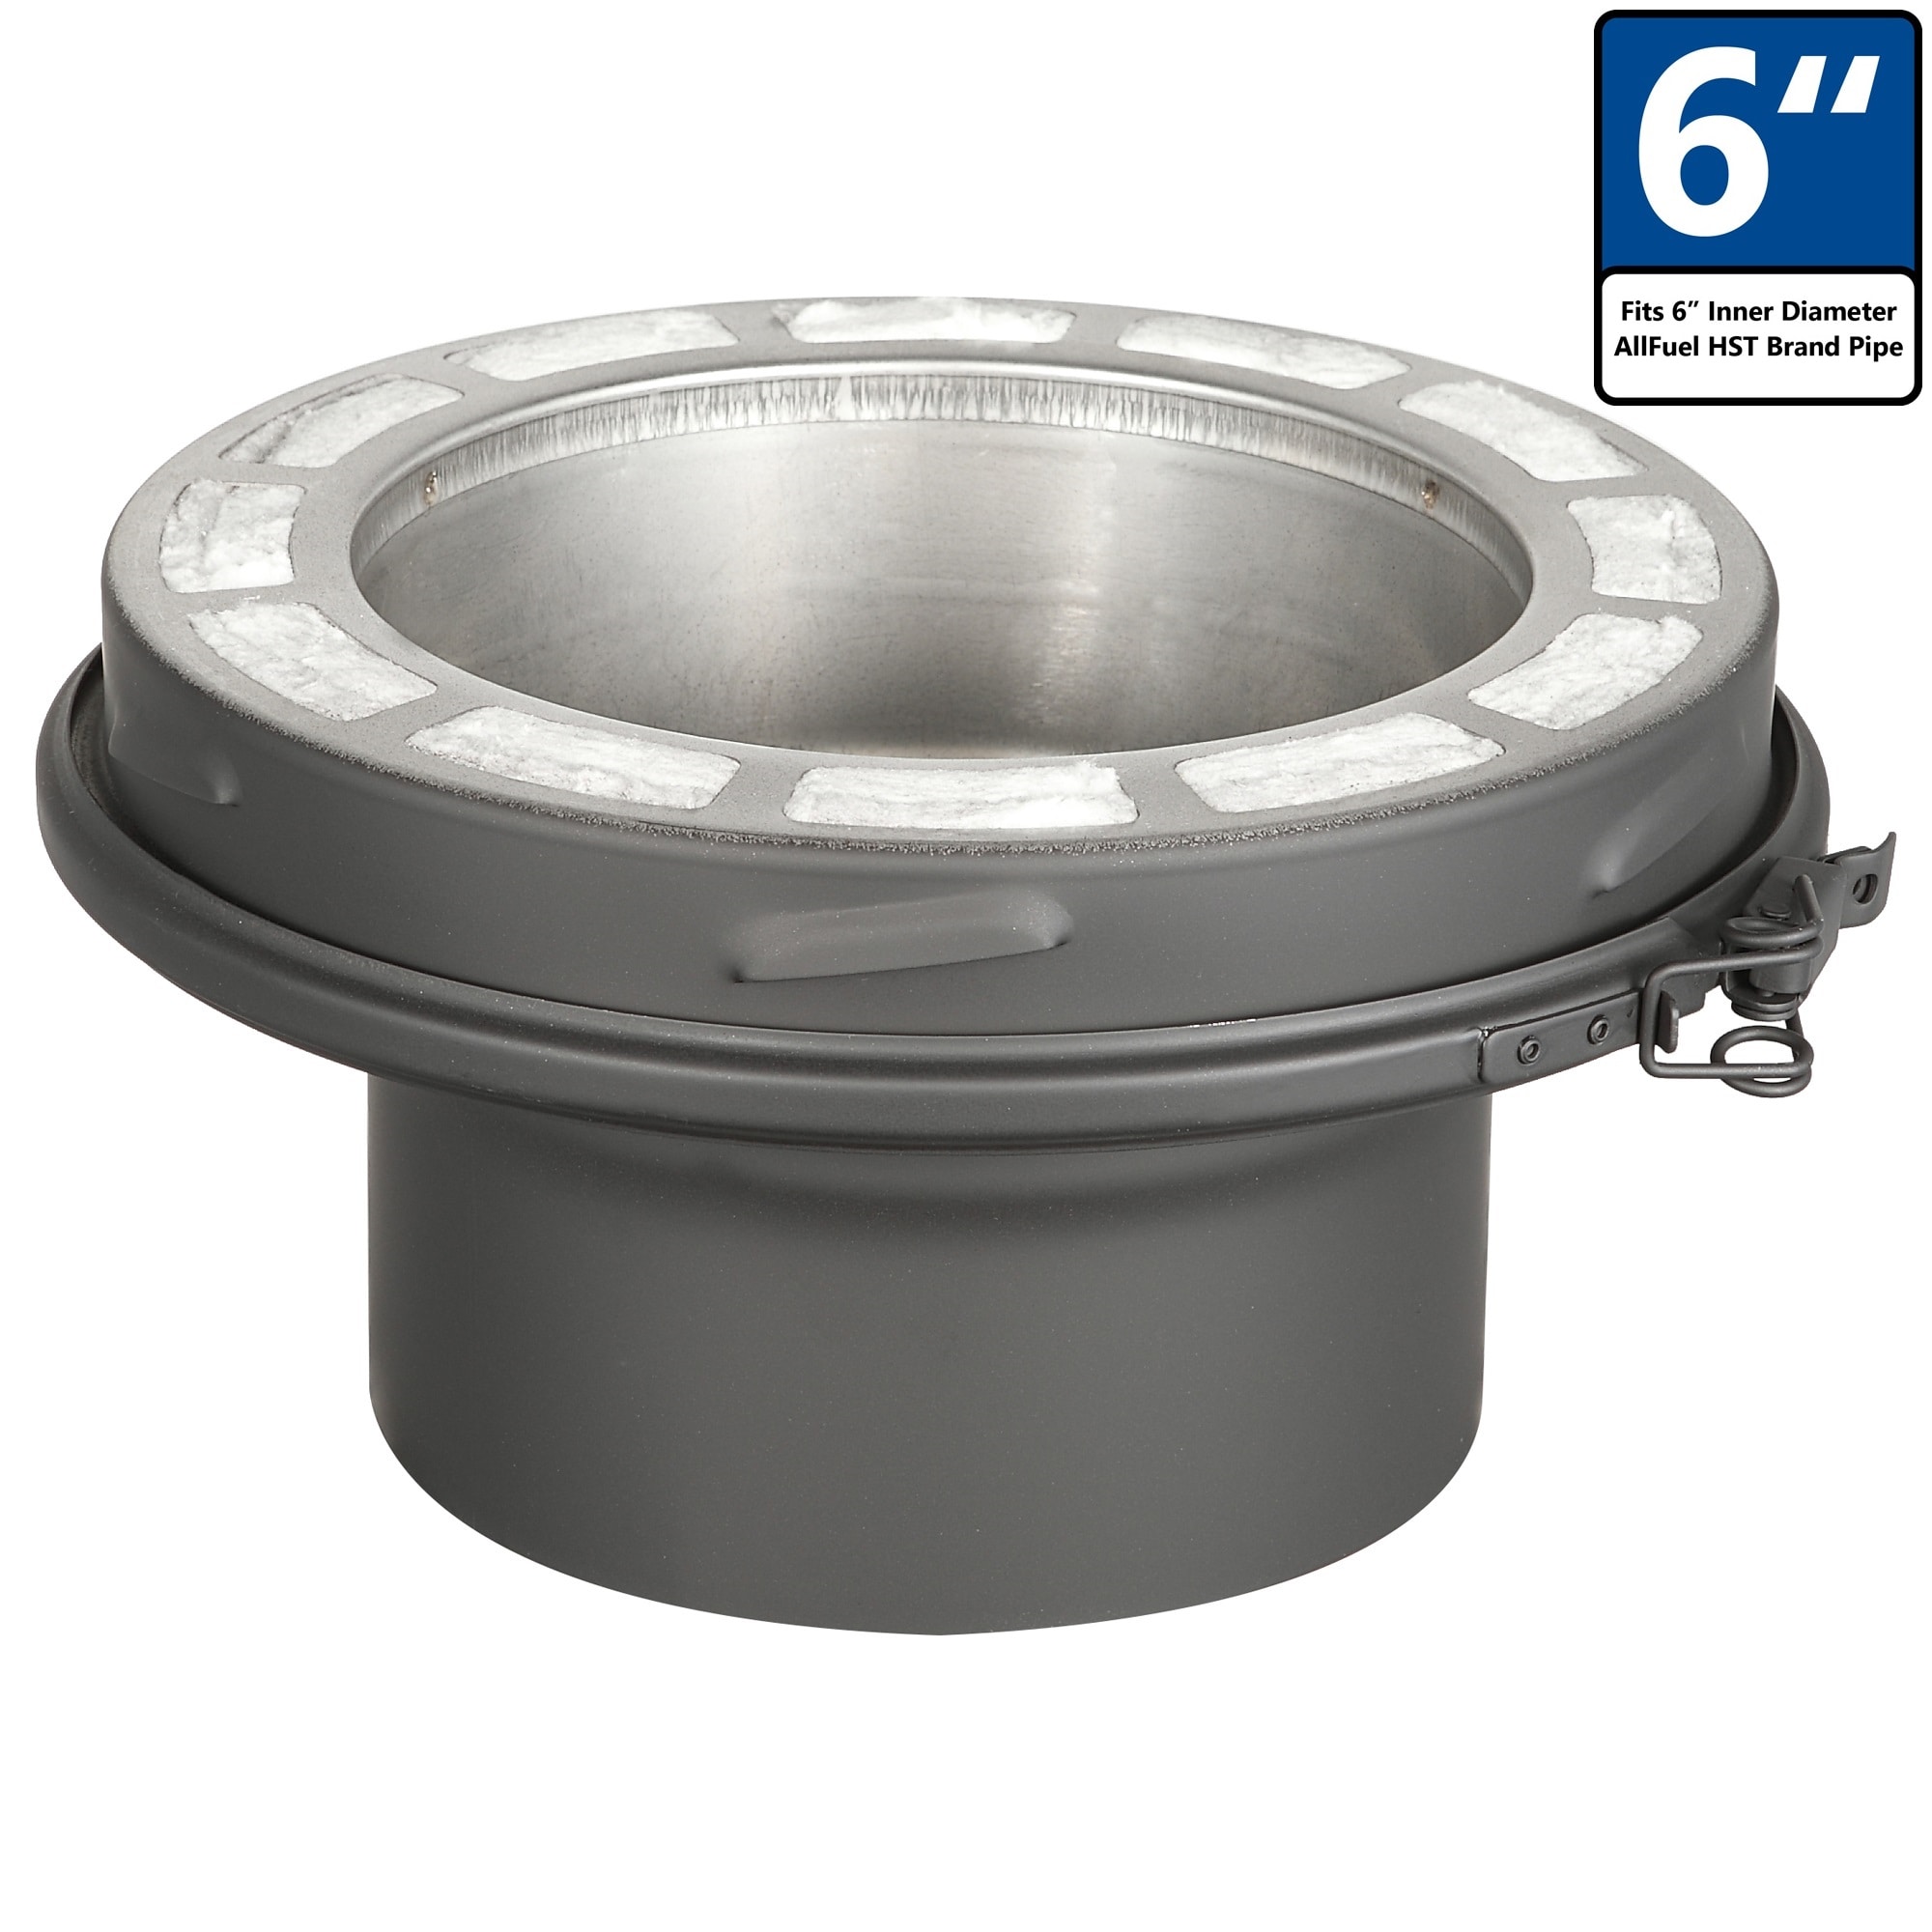 AllFuel HST Tee with Clean Out Cap for 6 Diameter 304 Stainless Steel All  Fuel Class-A Double Wall Insulated Chimney Pipe